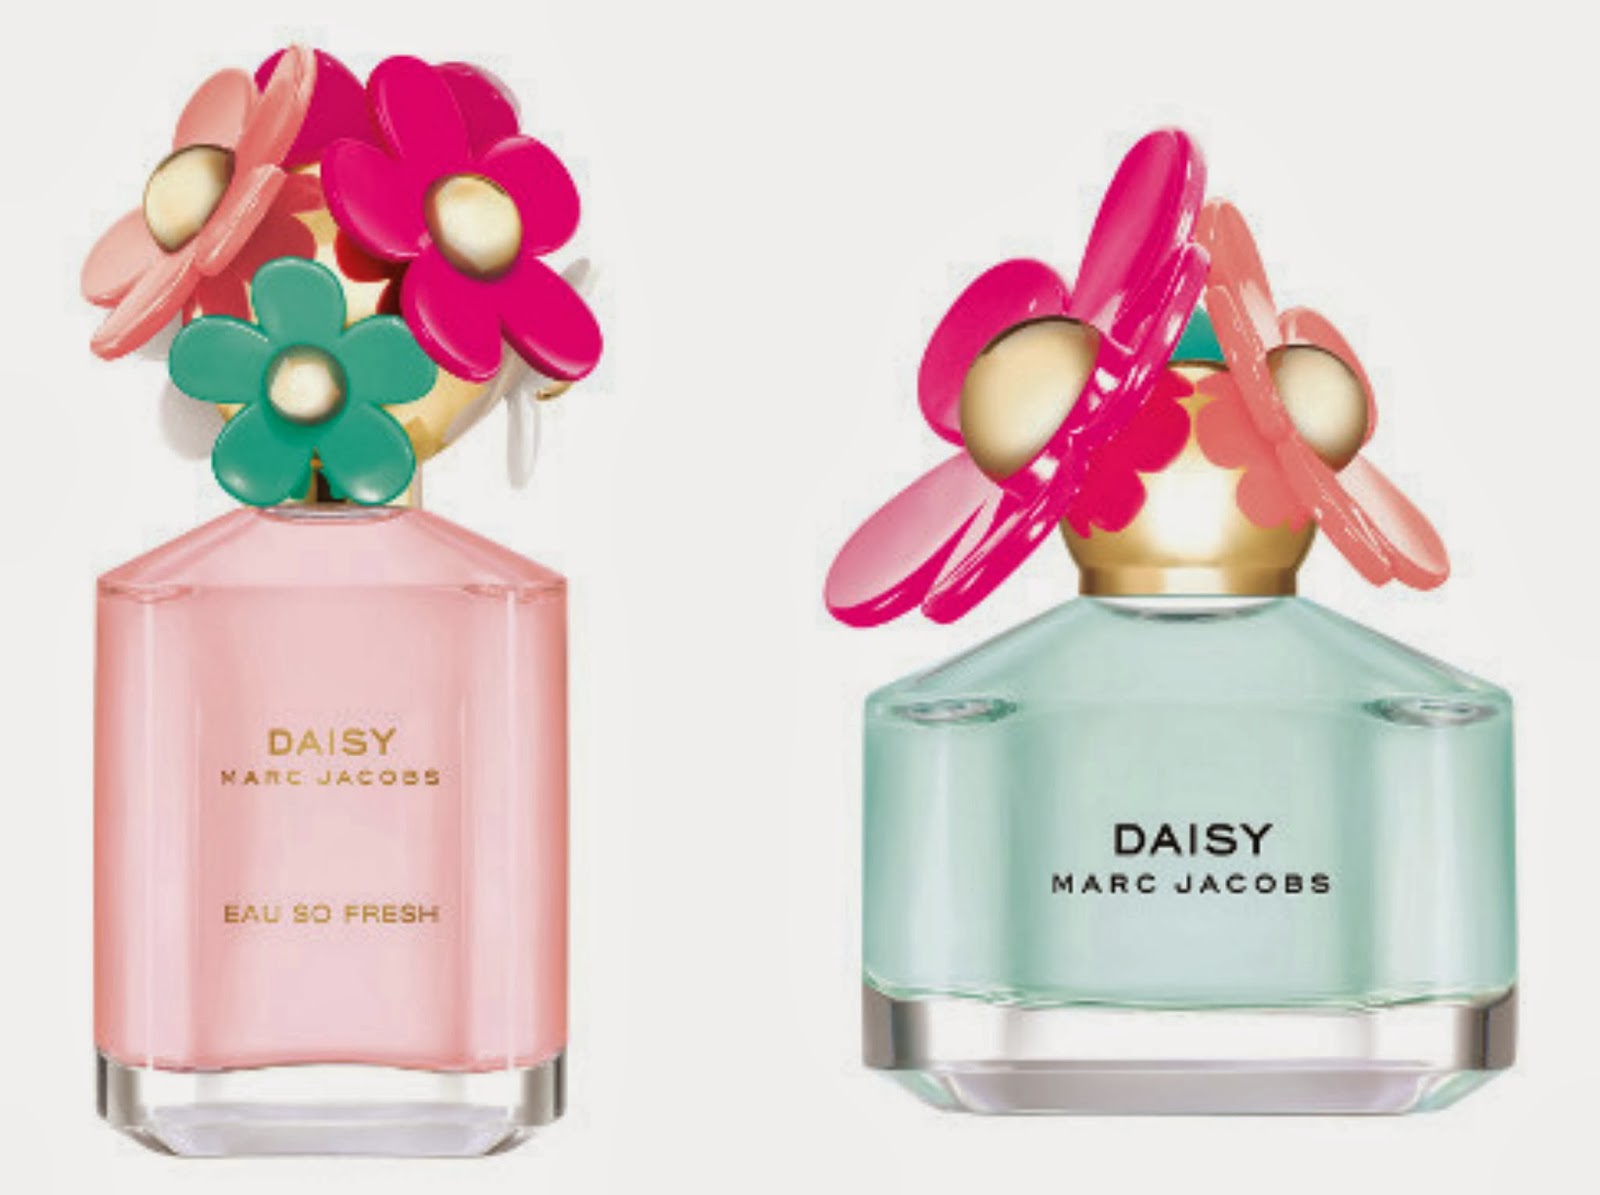 4. Marc Jacobs Daisy Nail Art Inspiration - wide 6